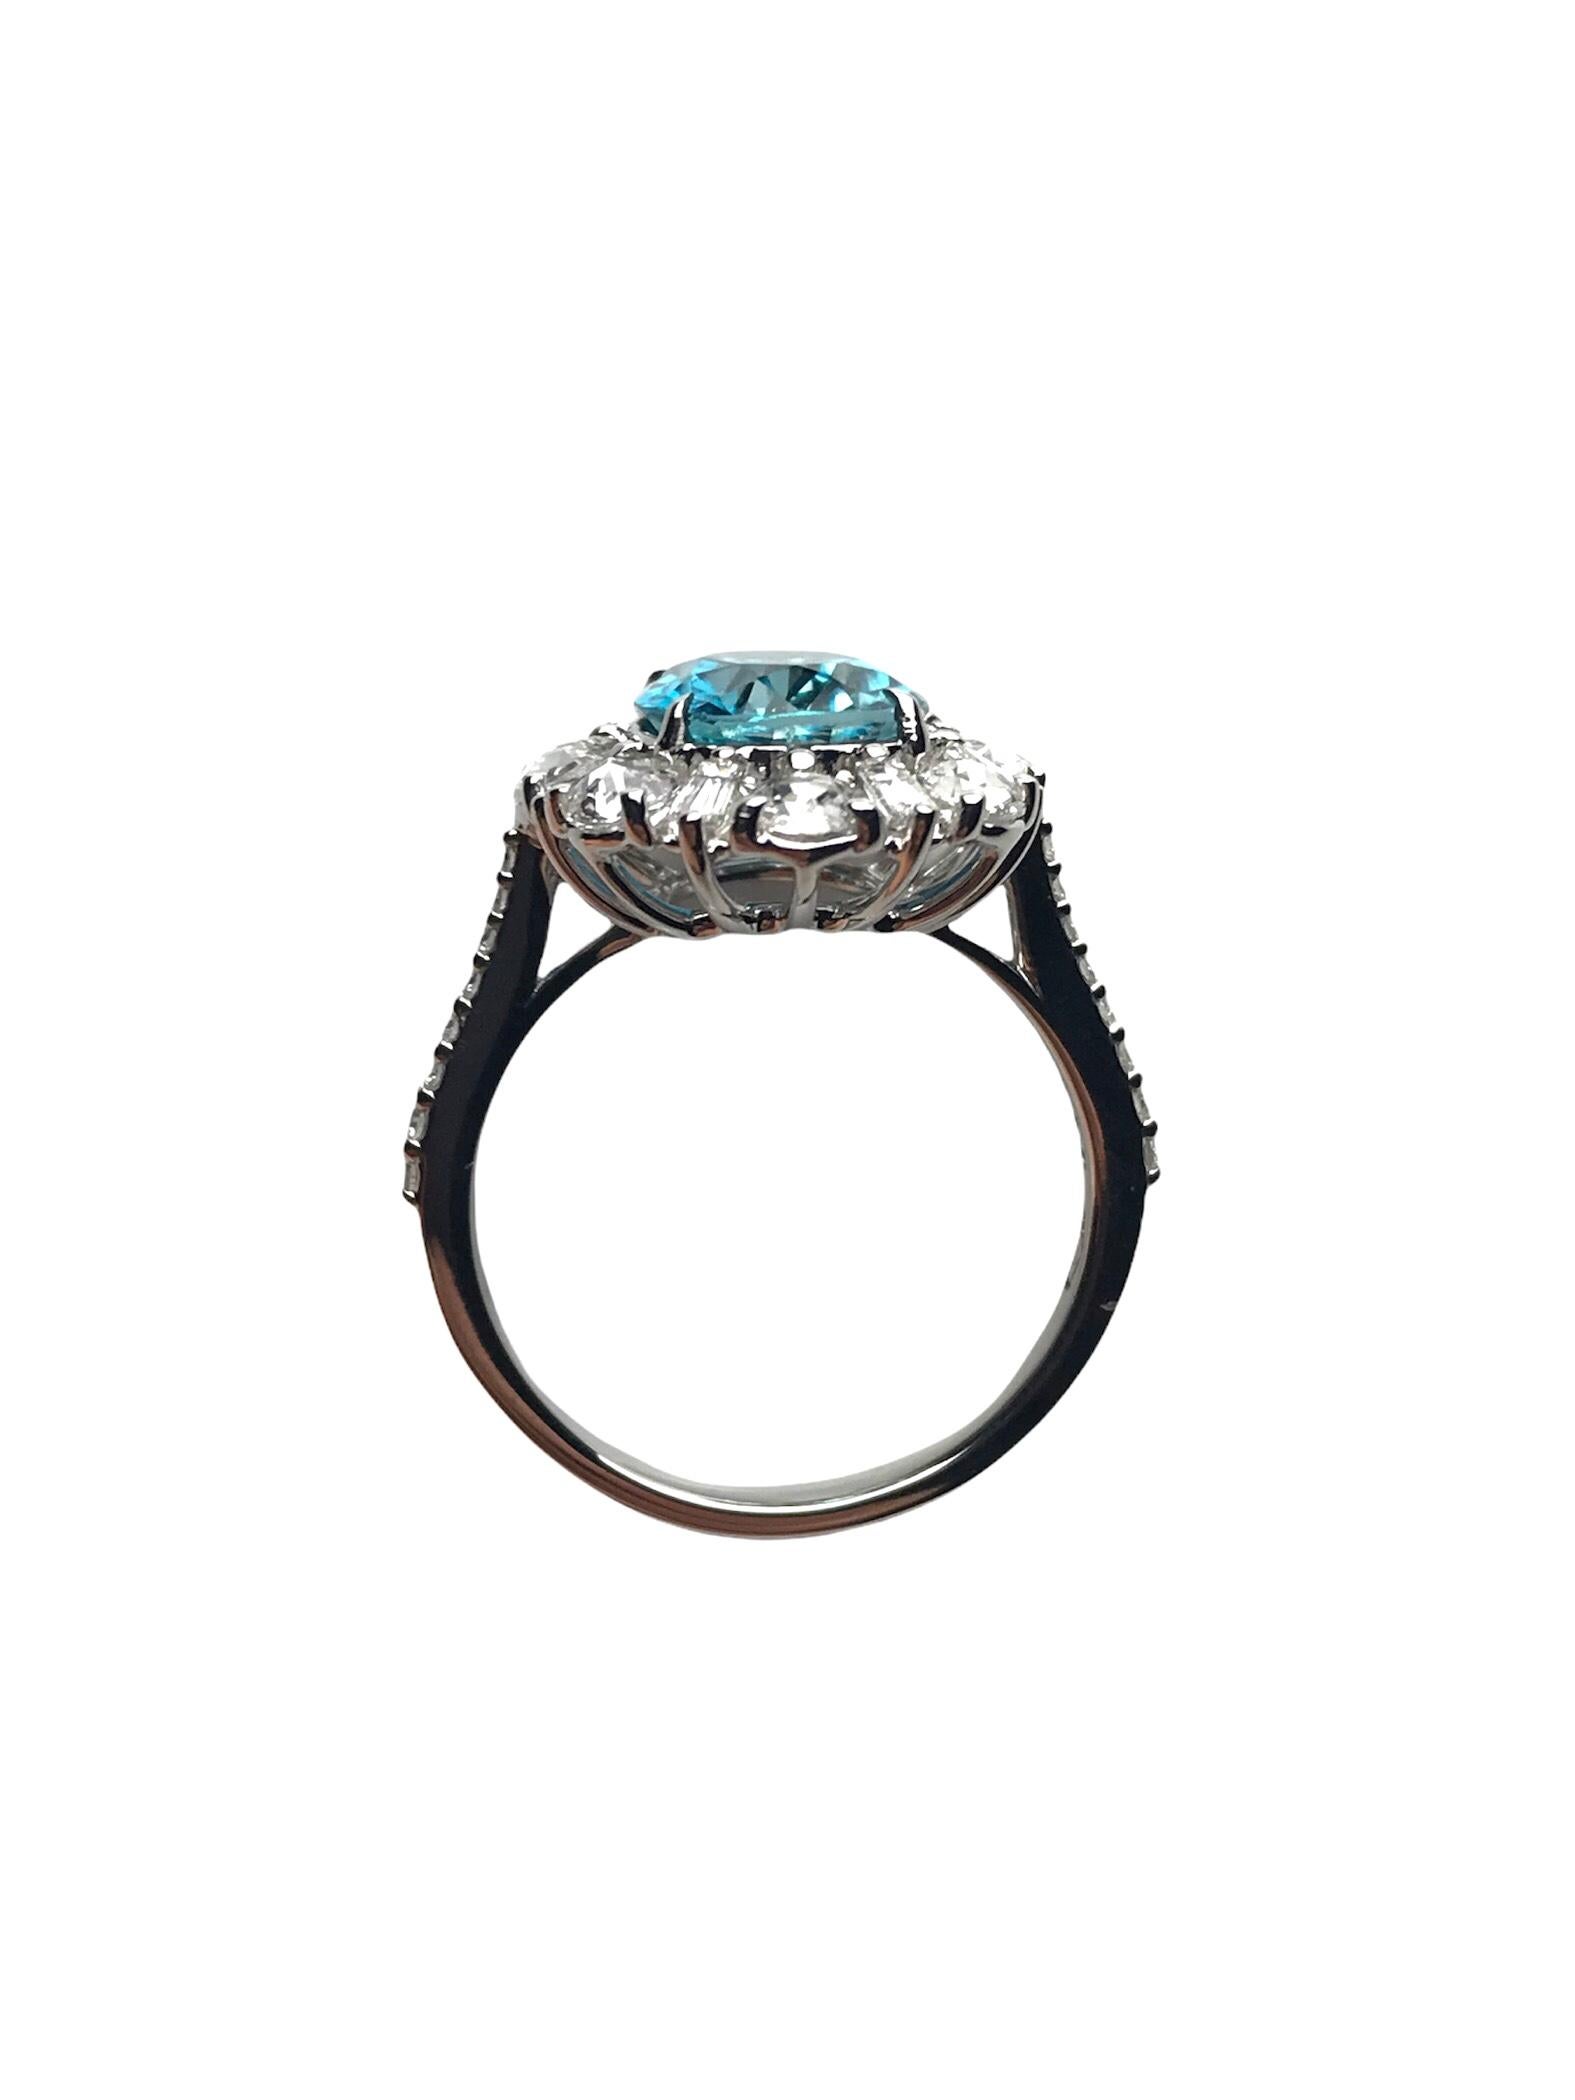 4.08 Carat Oval Cut Blue Zircon and 0.96 Carat Diamond Ring in 18k White ref1413 In New Condition For Sale In New York, NY